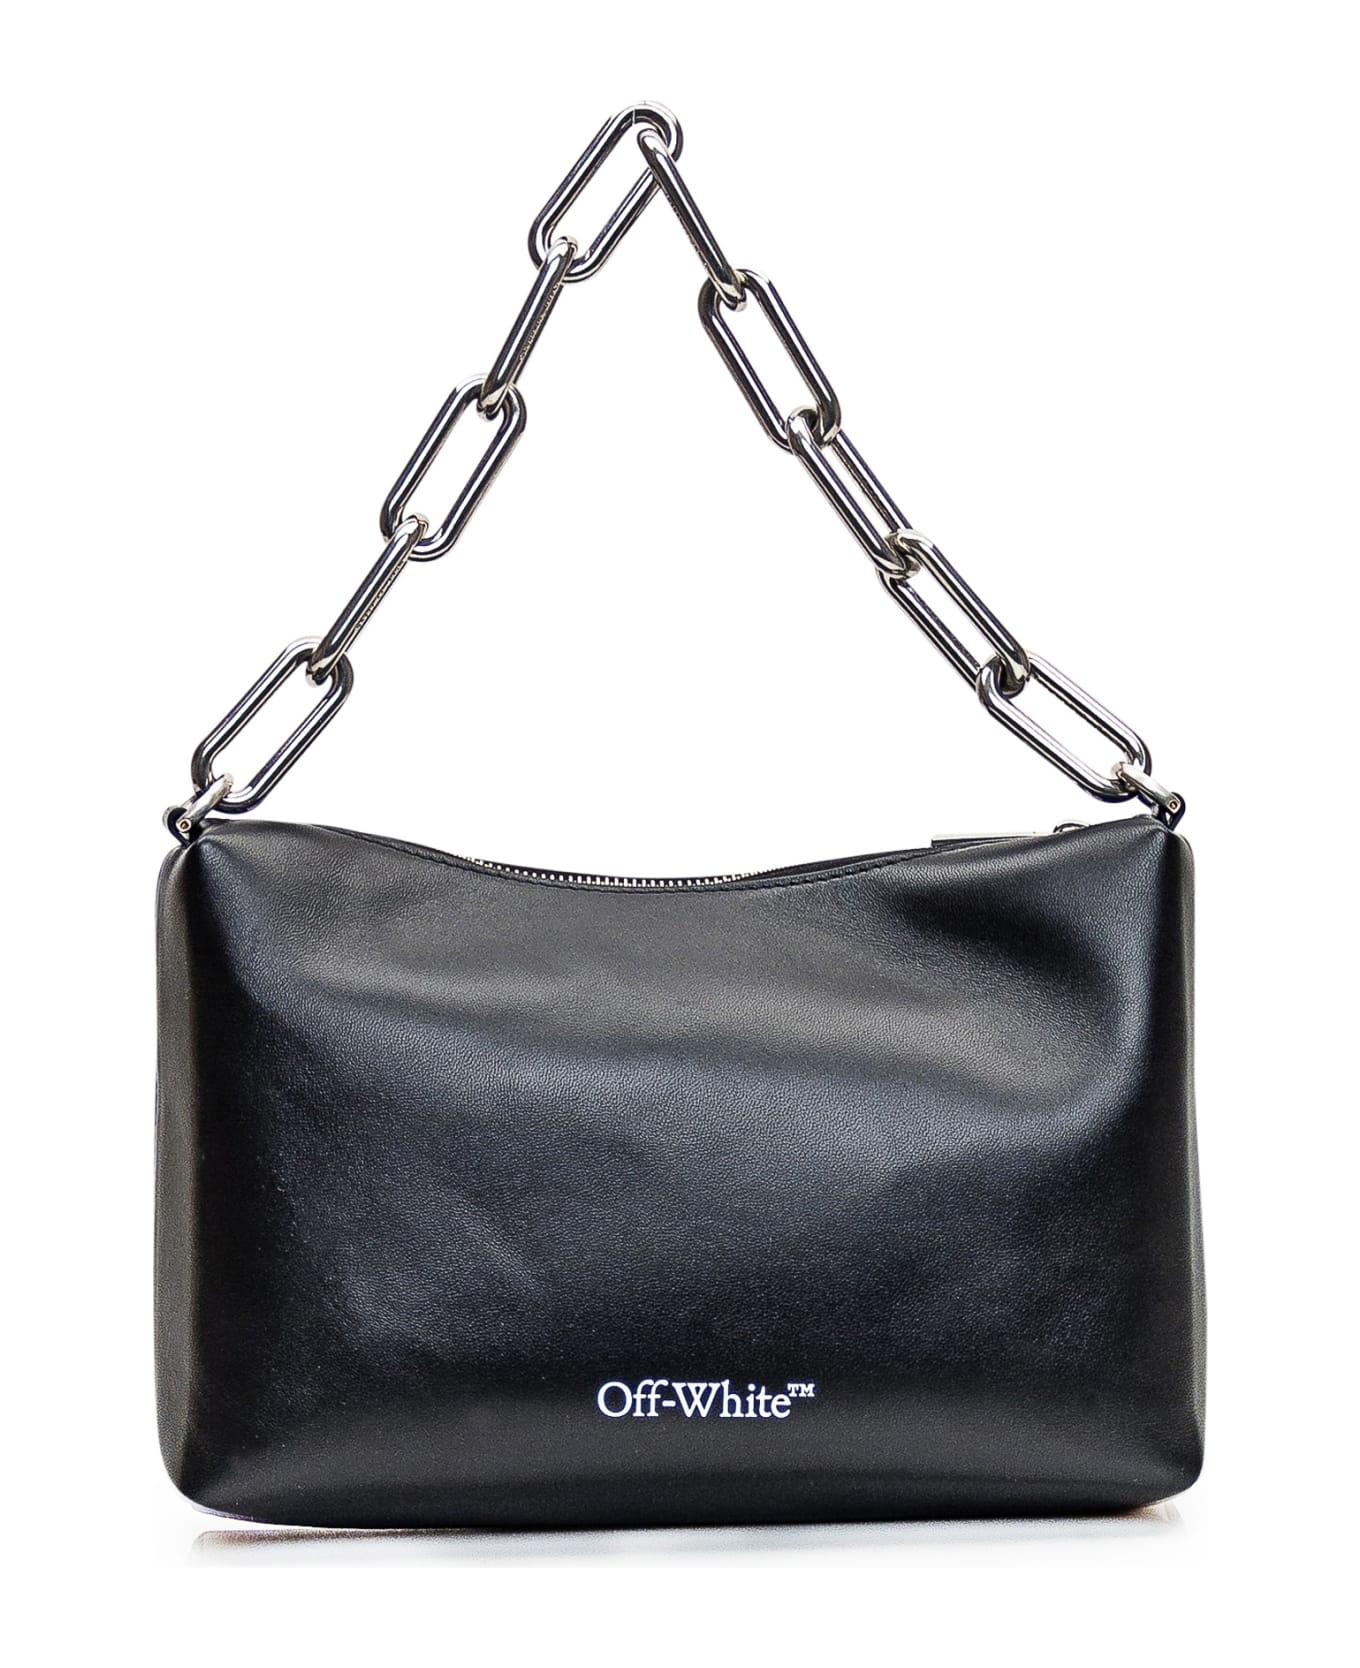 Off-White Pouch With Writing - BLACK SILVER